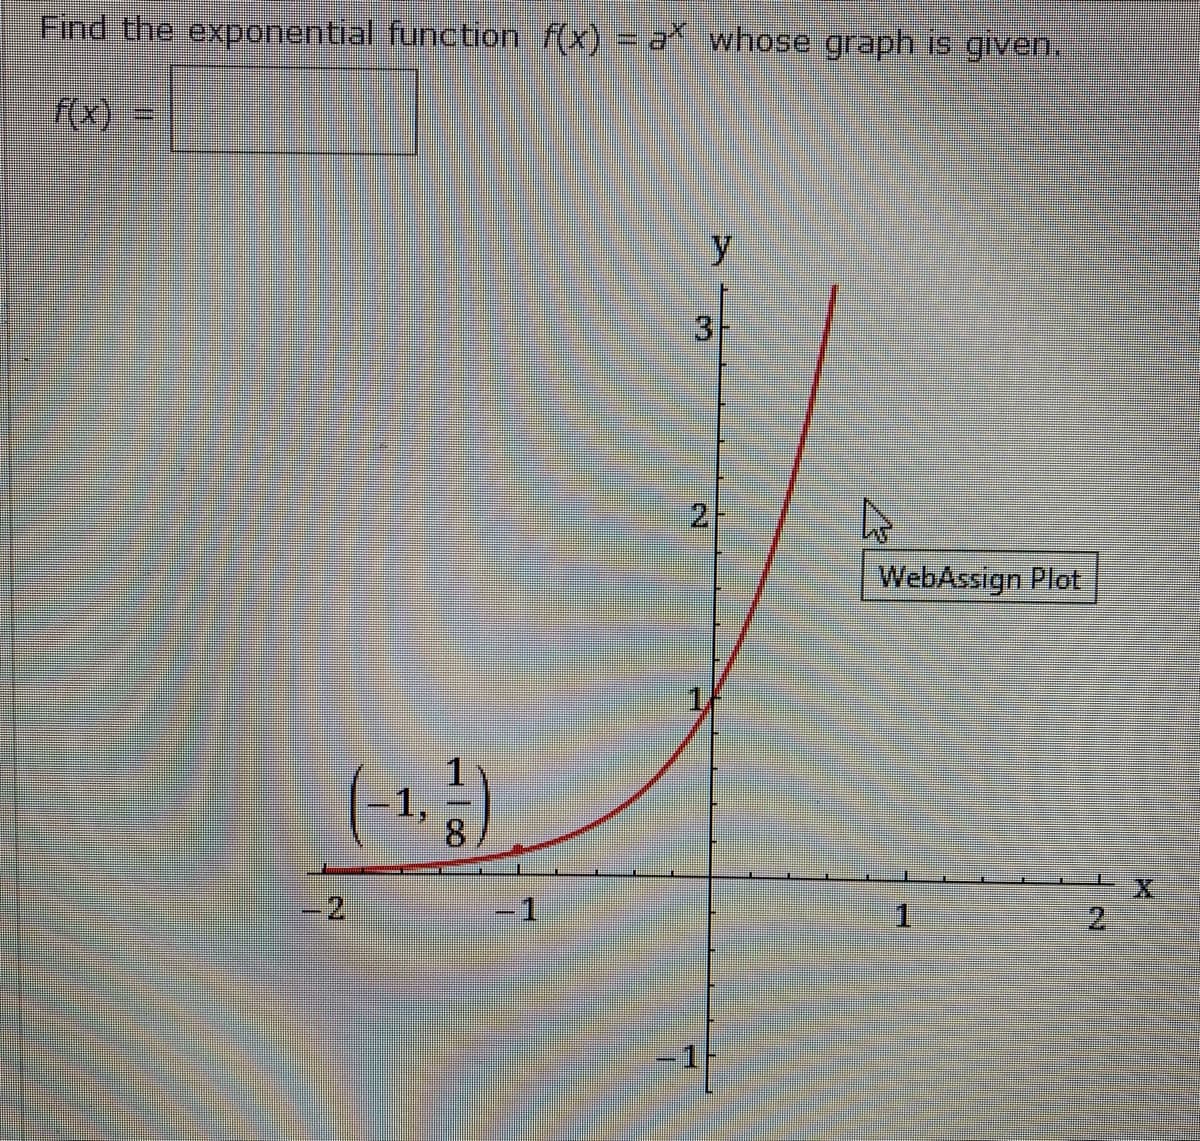 Find the exponential function f(x) = a whose graph is given.
f(x)
y
2
WebAssign Plot
(+)
1,
8
-2
-1
1
2.
